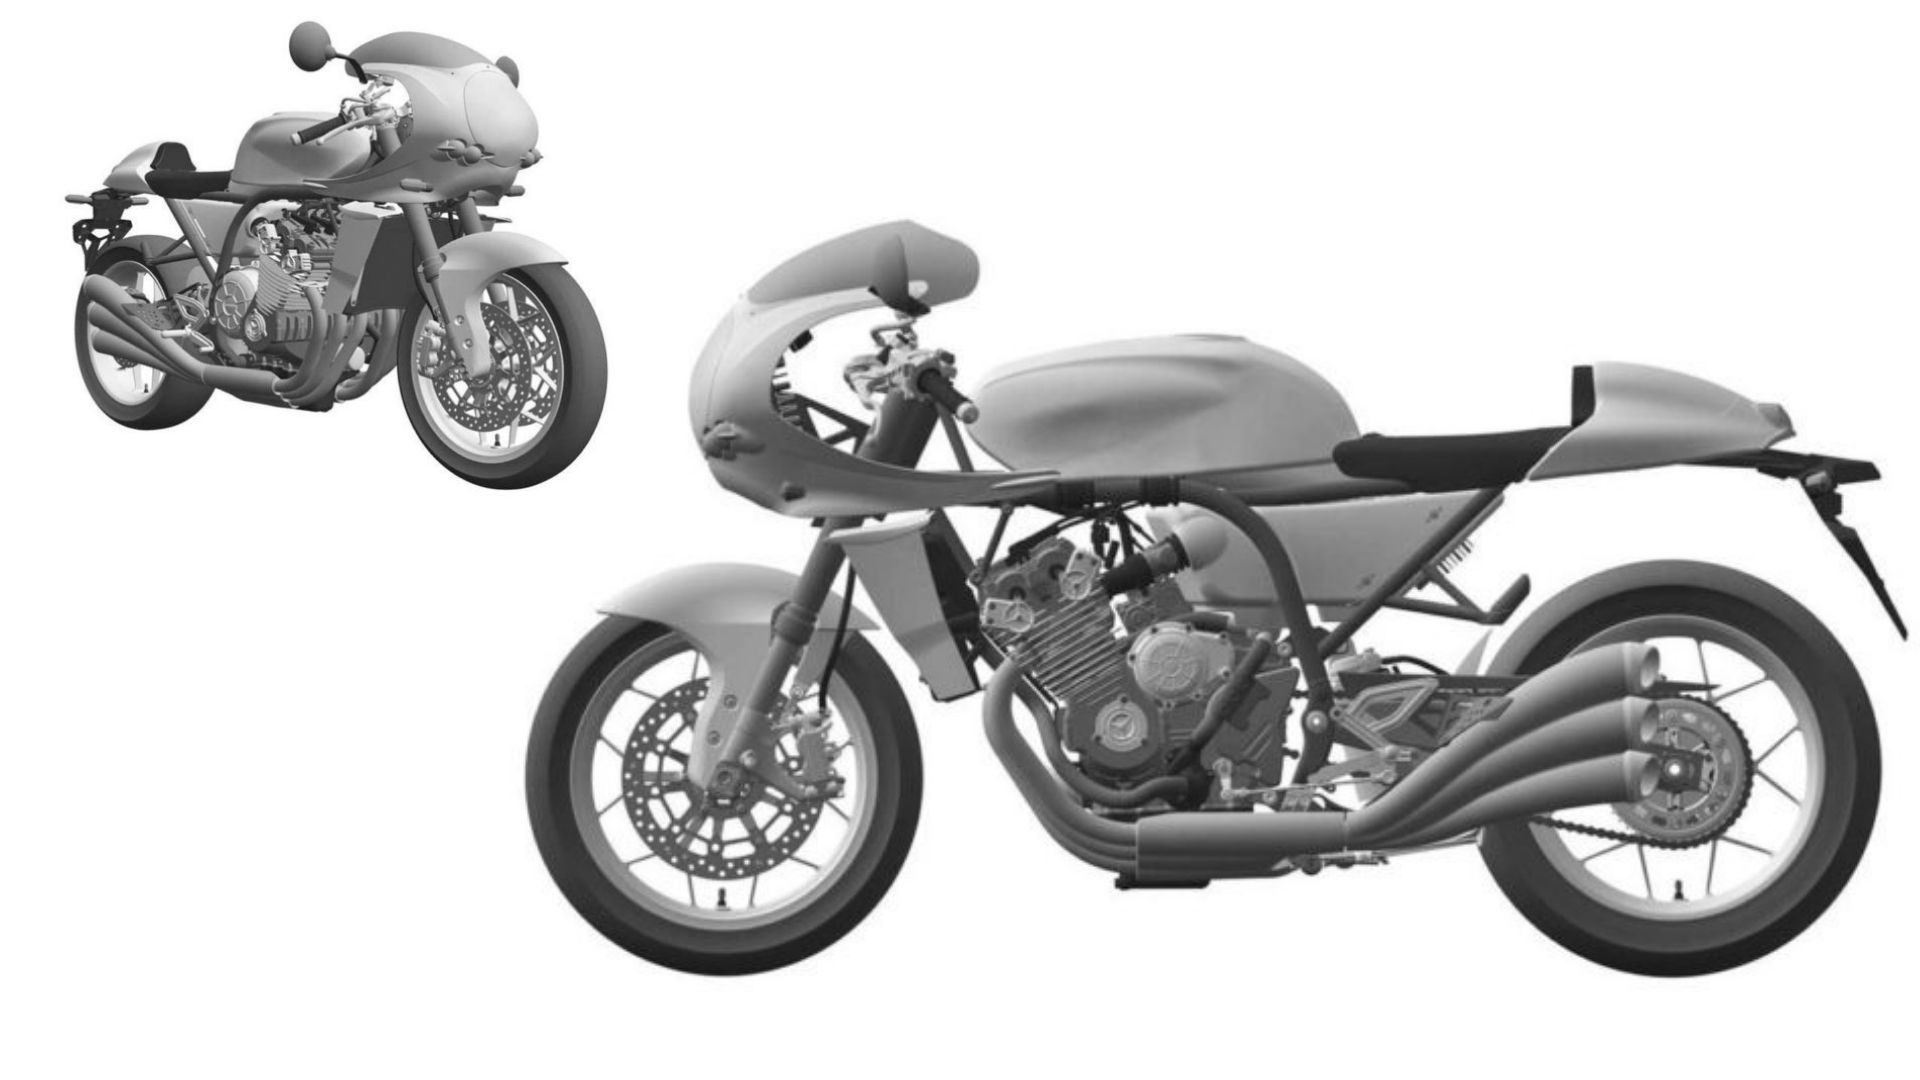 Honda Working On Inline Six Cylinder Motor To Power A New Cafe Racer